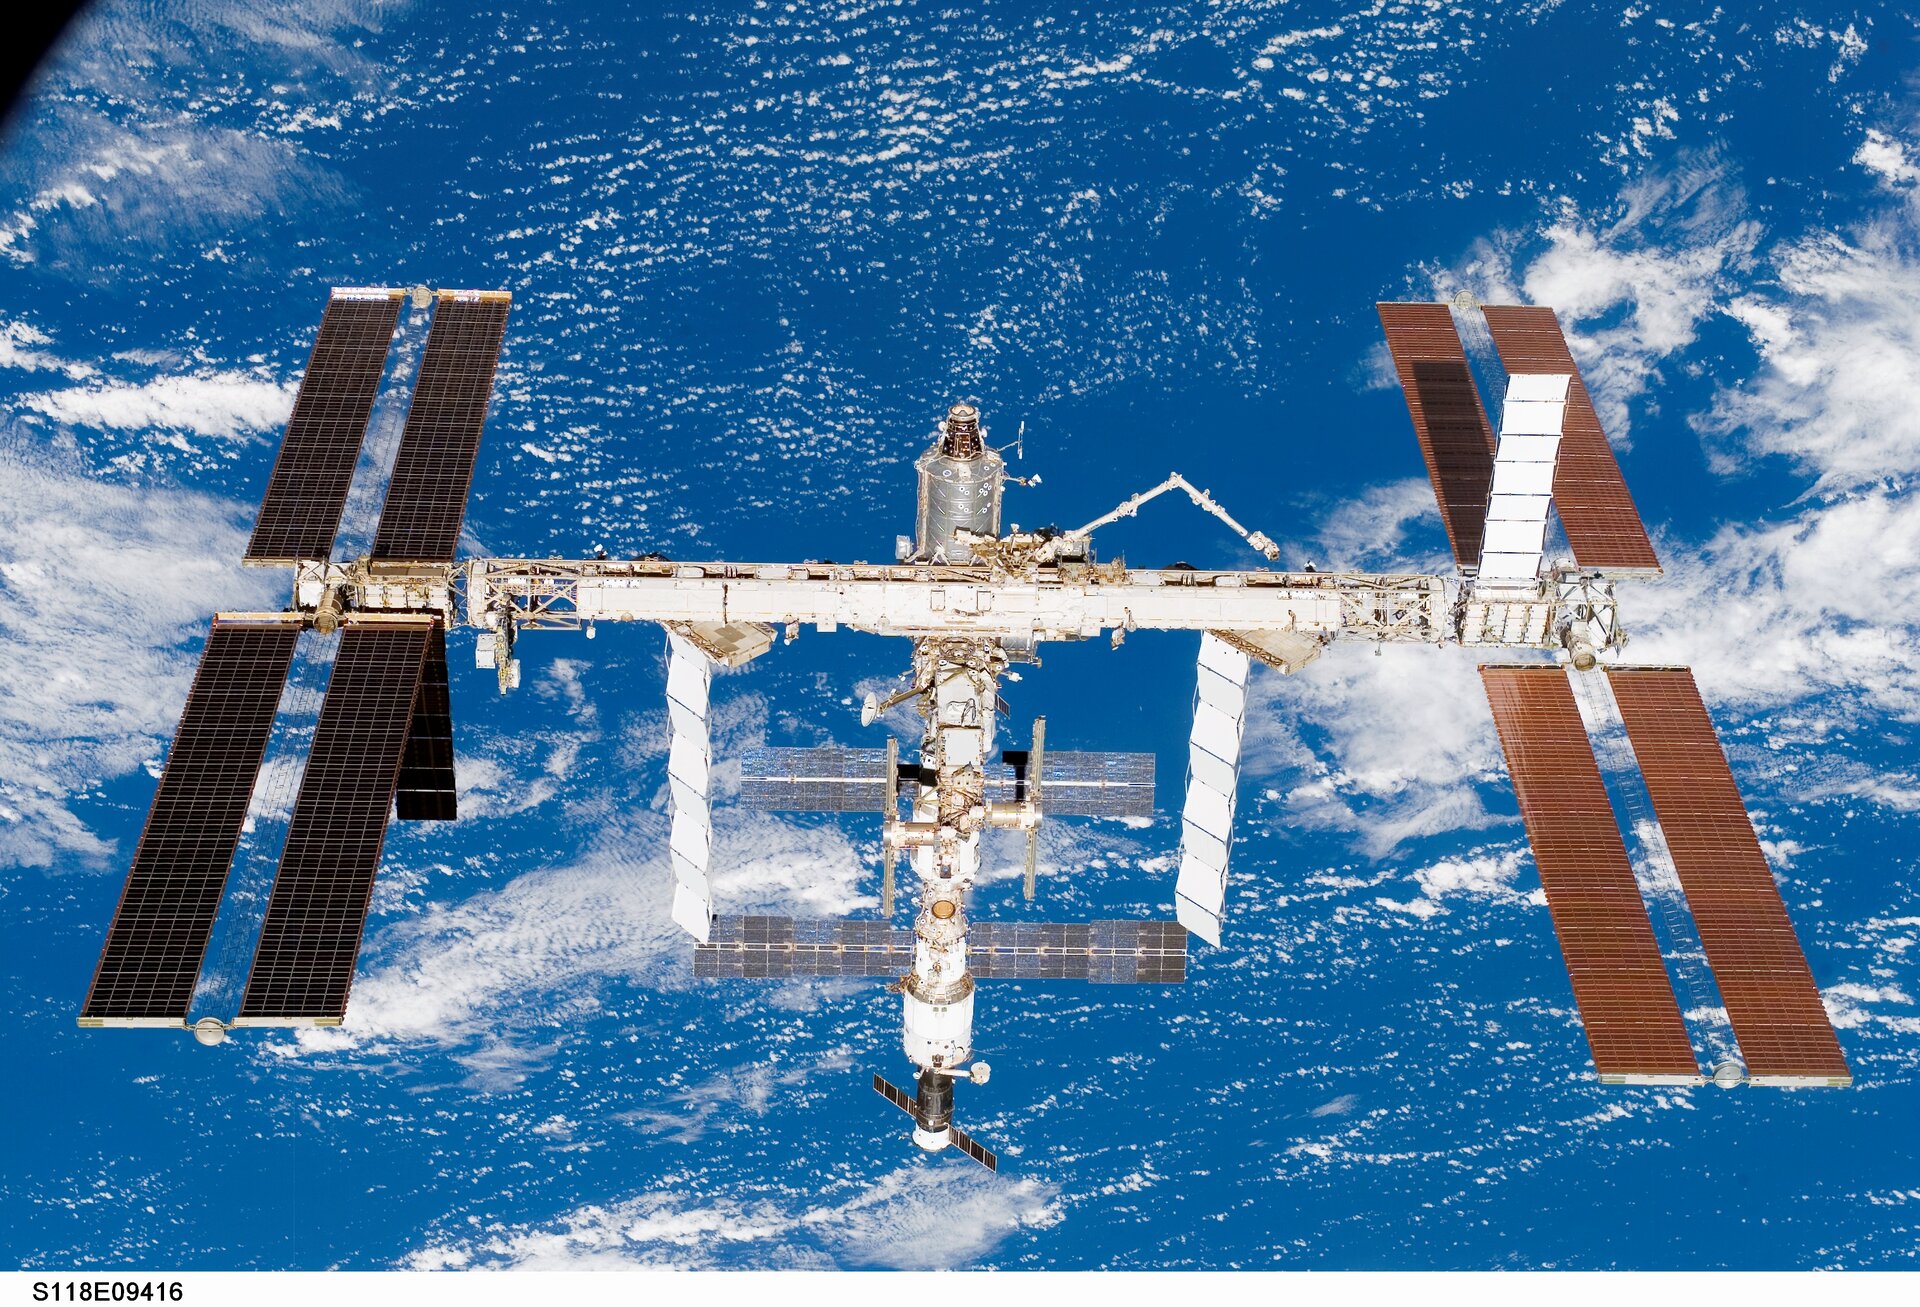 ISS configuration as of 19 August 2007